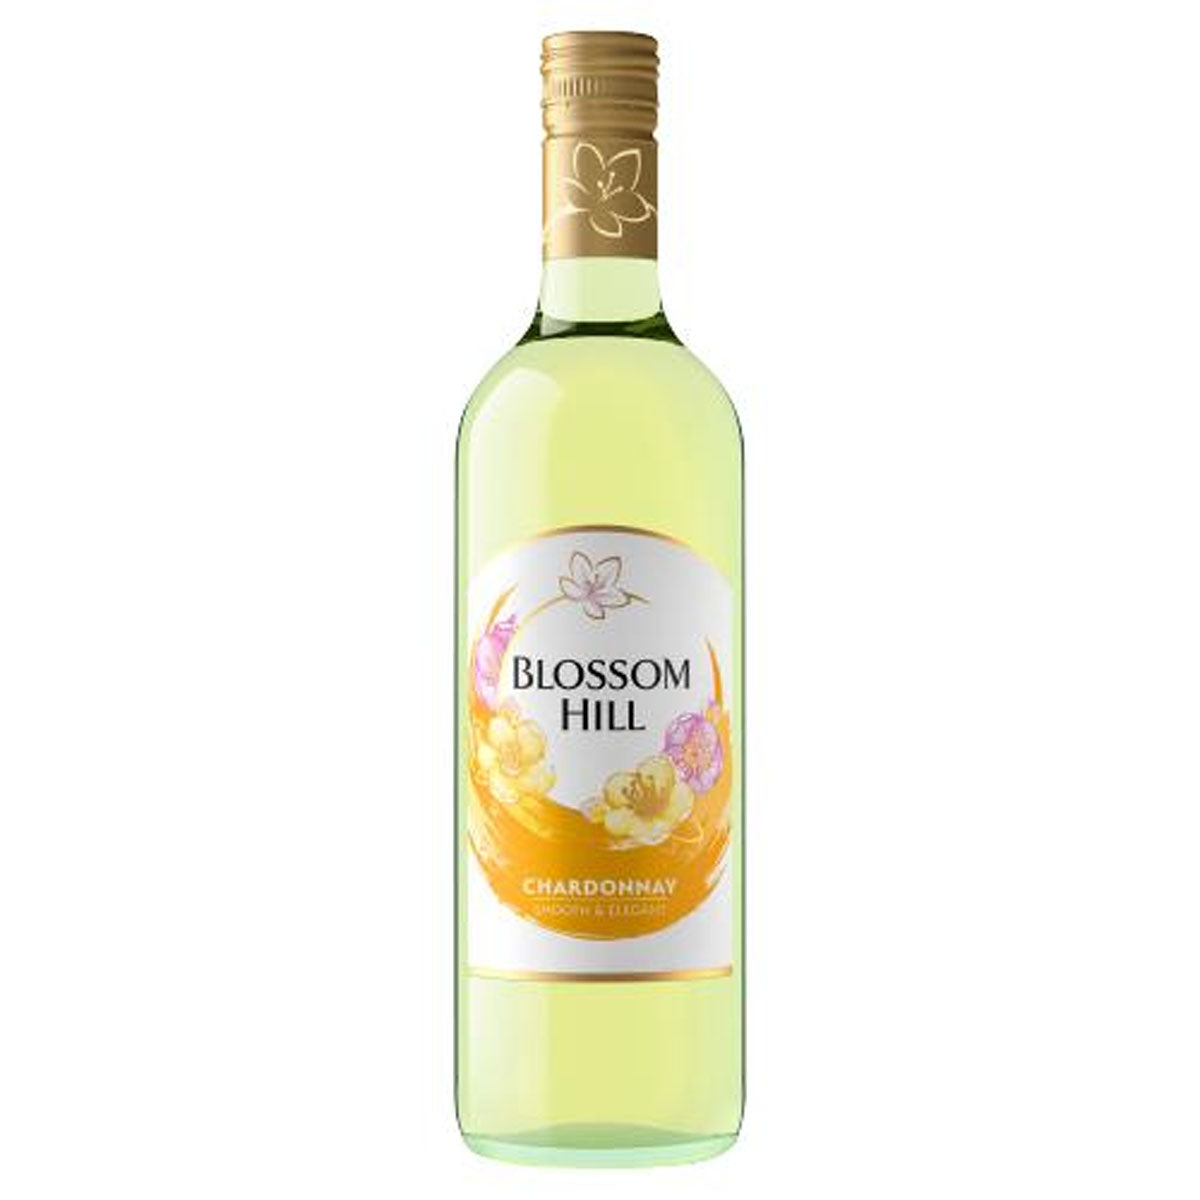 A bottle of Blossom Hill - Chardonnay (12% ABV) - 750ml on a white background.